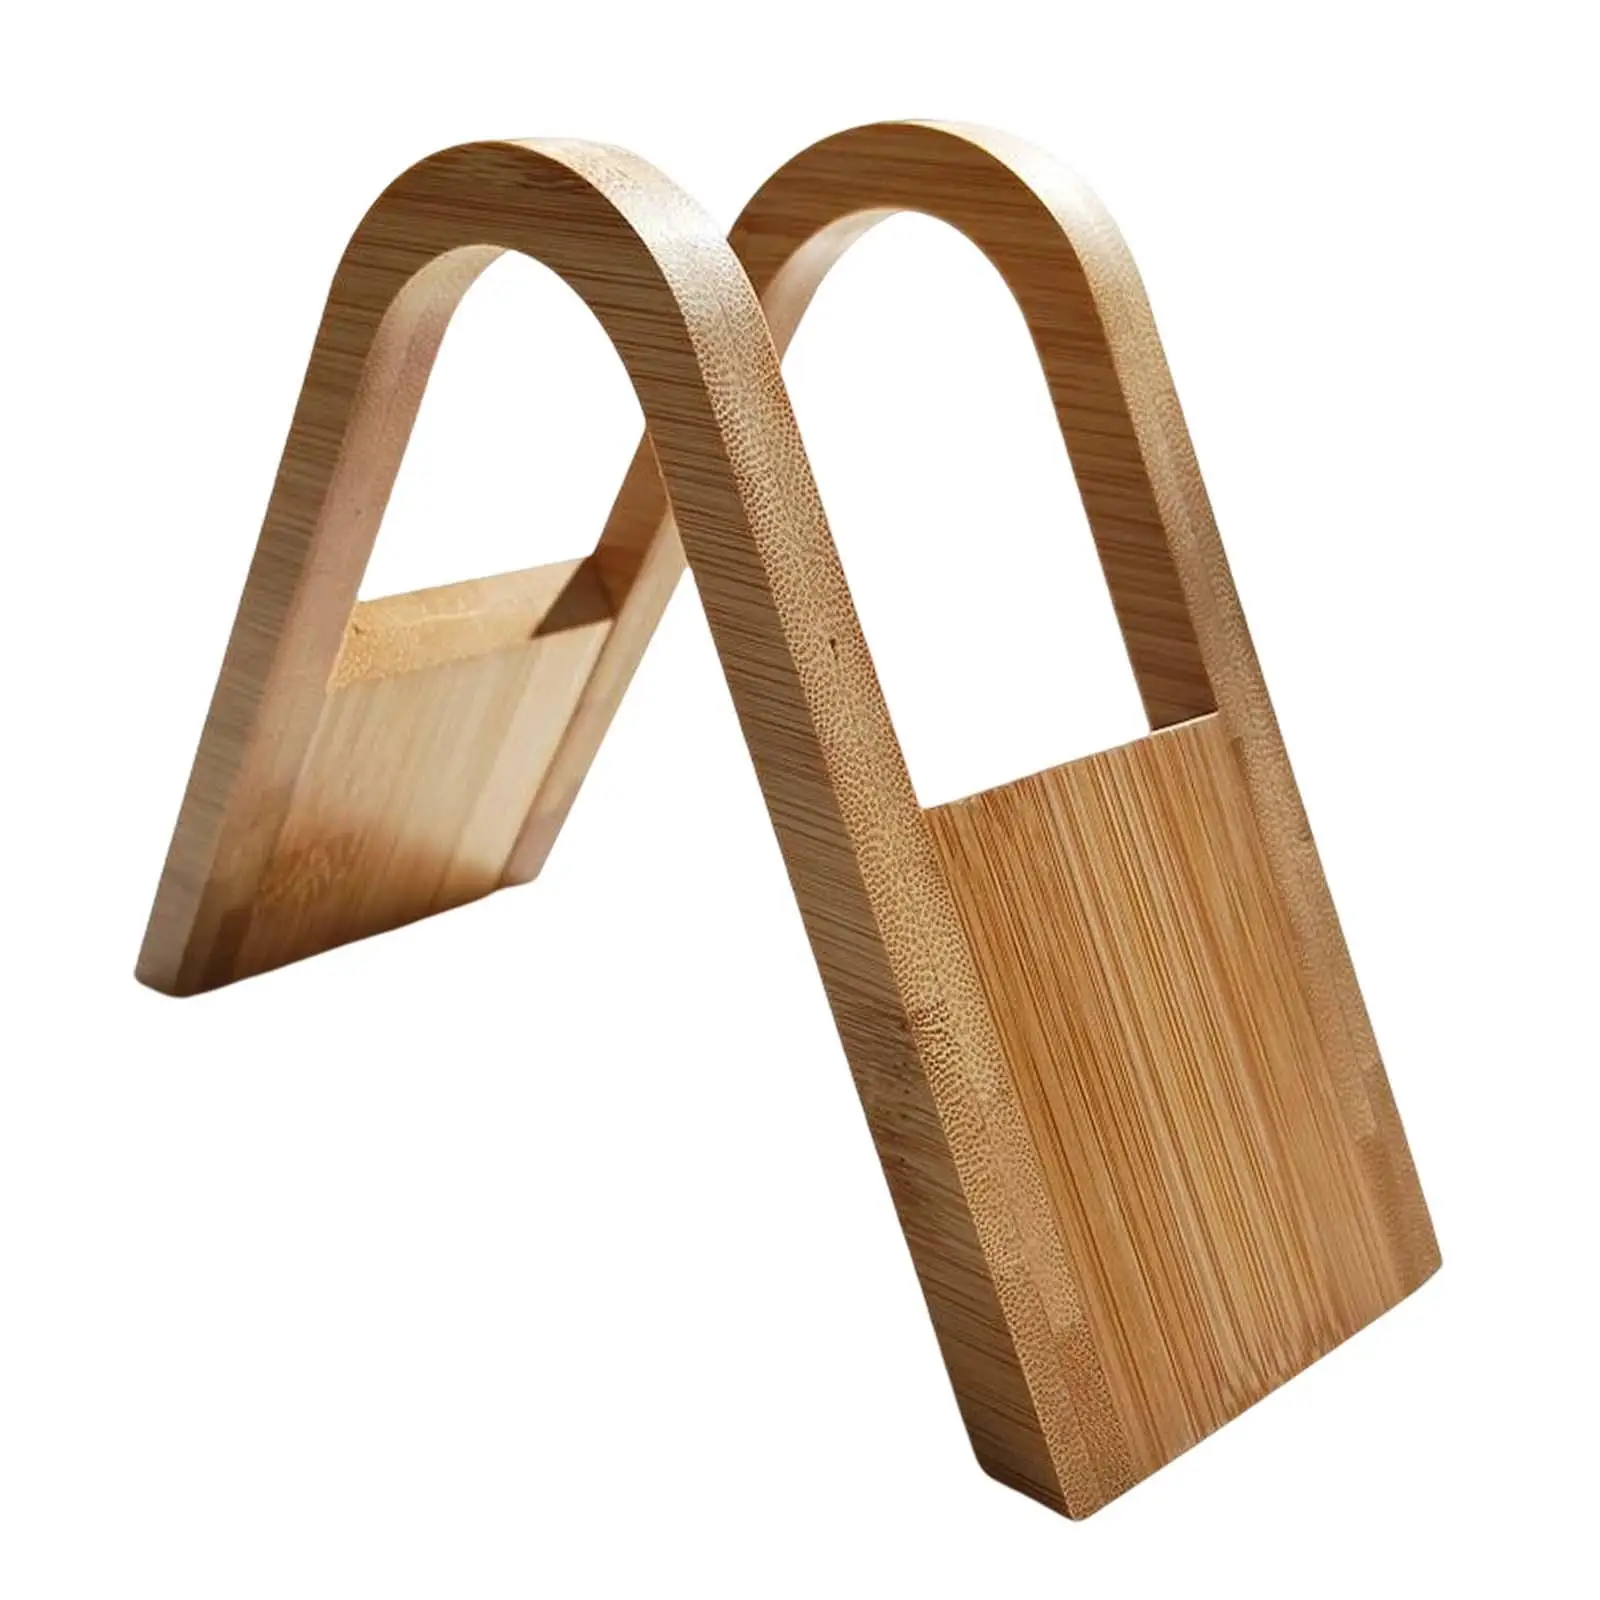 Fan Shaped Coffee Paper Storage Rack Standing Design Bamboo for Kitchen Home